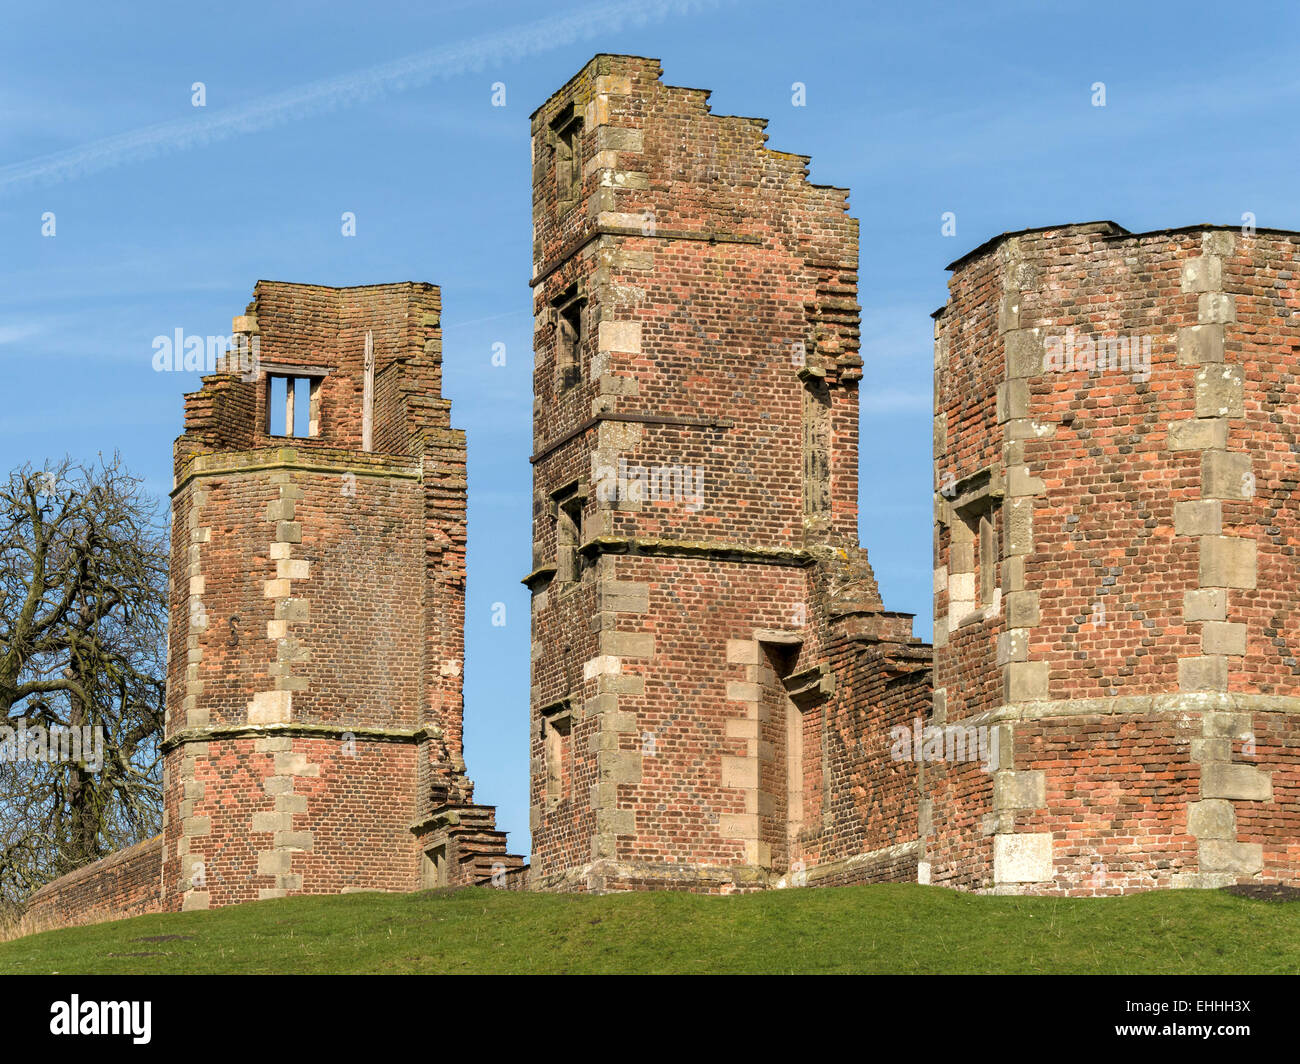 Rovine di Lady Jane Grey's House, Glenfield Lodge Park, Charnwood, Leicestershire, Inghilterra, Regno Unito. Foto Stock